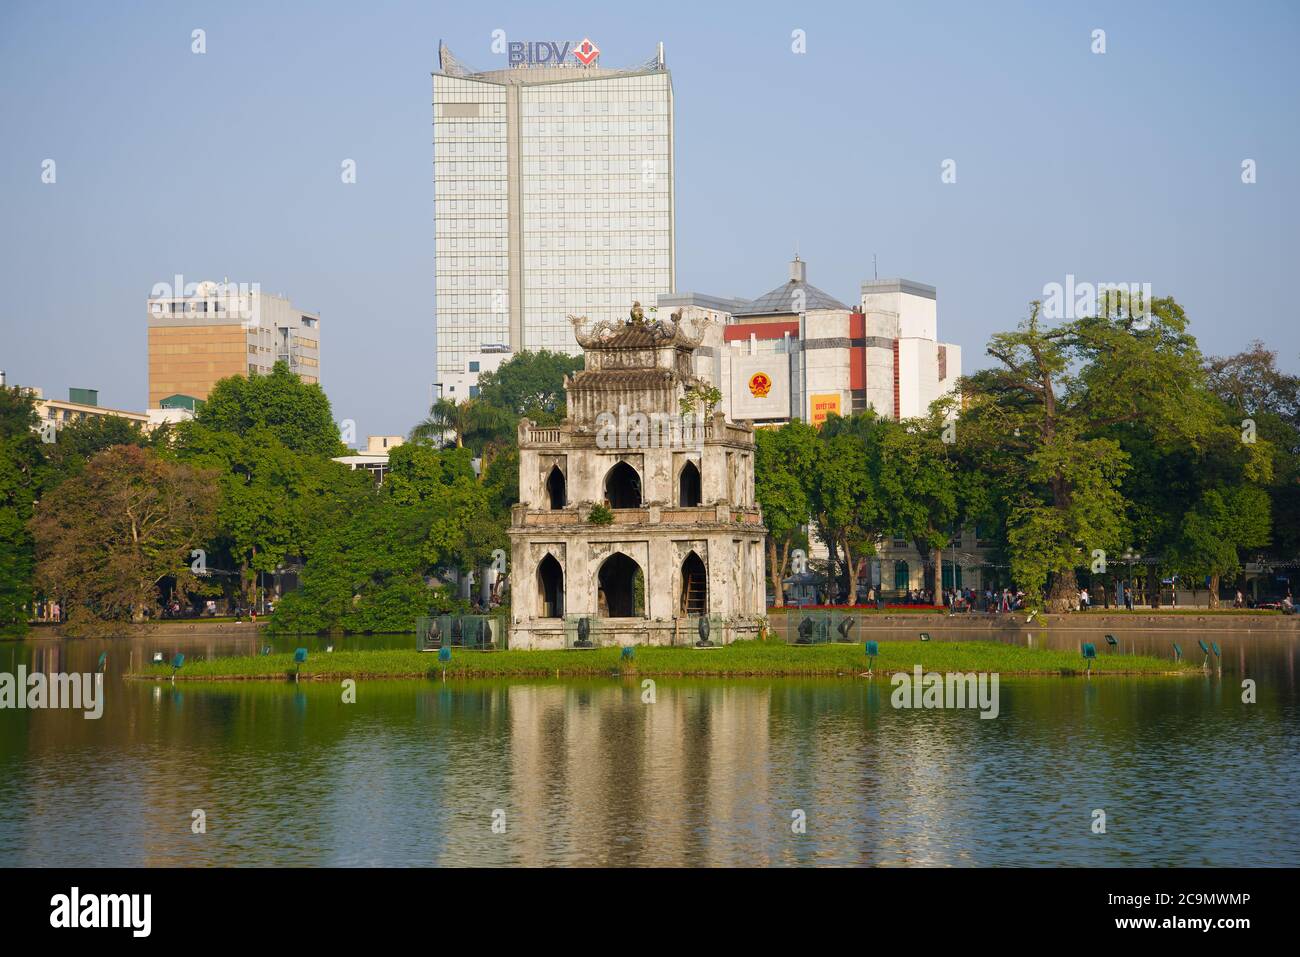 HANOI, VIETNAM - DECEMBER 13, 2015: View of the Turtle Temple on Hoan Kiem Lake on a sunny day Stock Photo